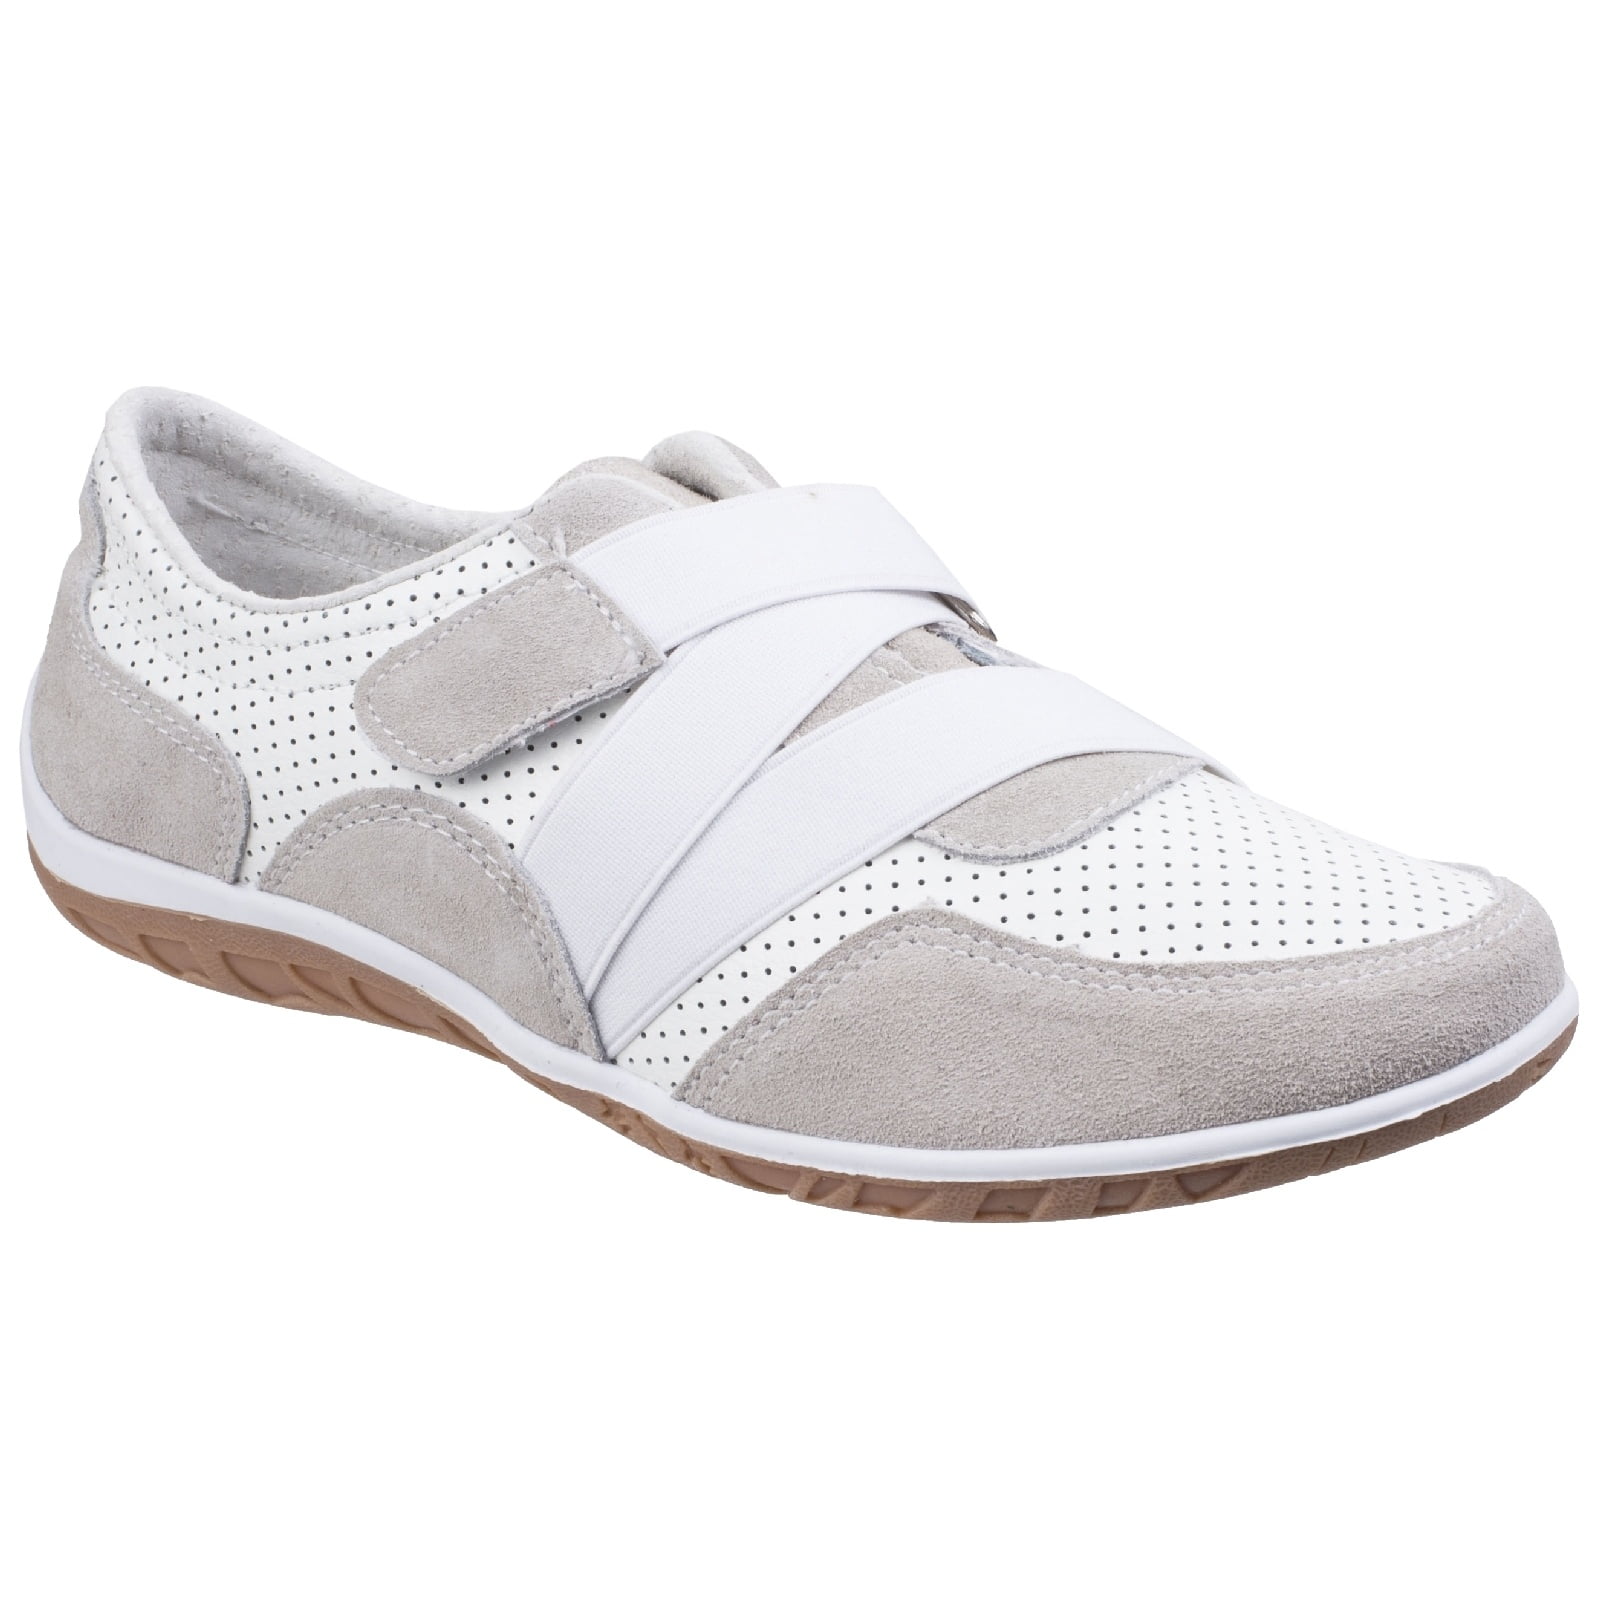 Fleet & Foster Paros Womens Synthetic Material Flats Shoes White